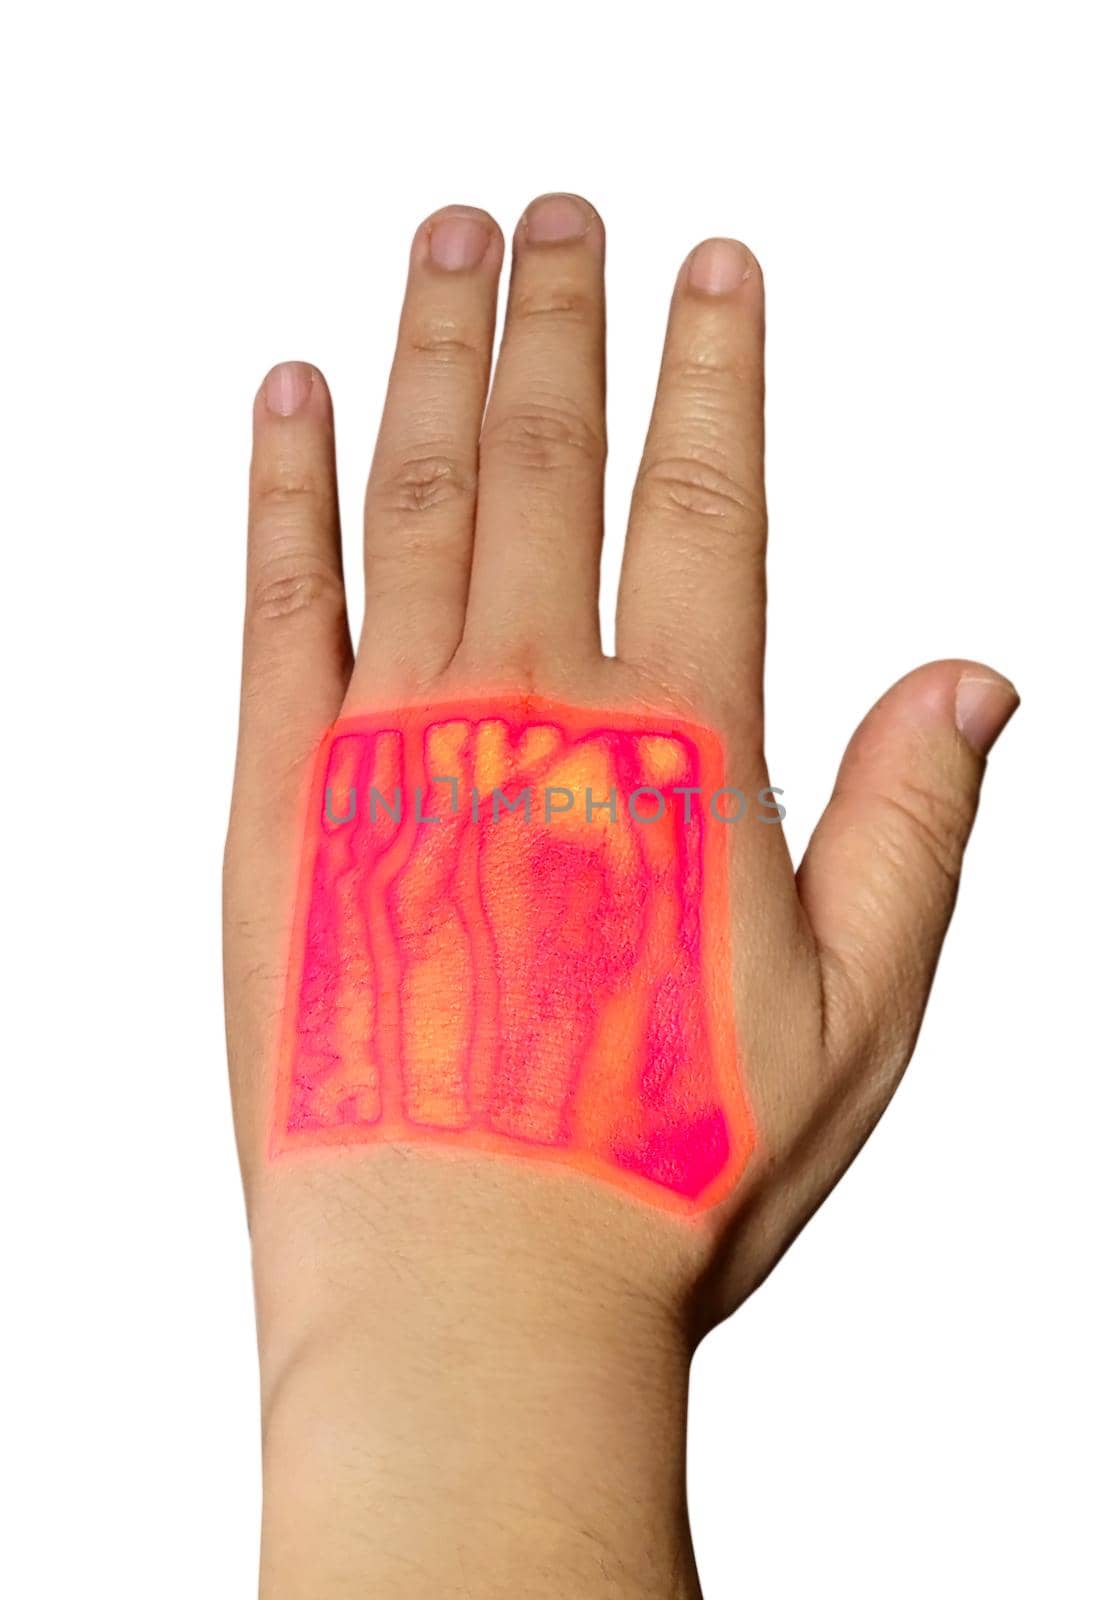 Vein finder handheld infrared of left hand showing cephalic vein and basilic vein for blood sample test. Clipping path.